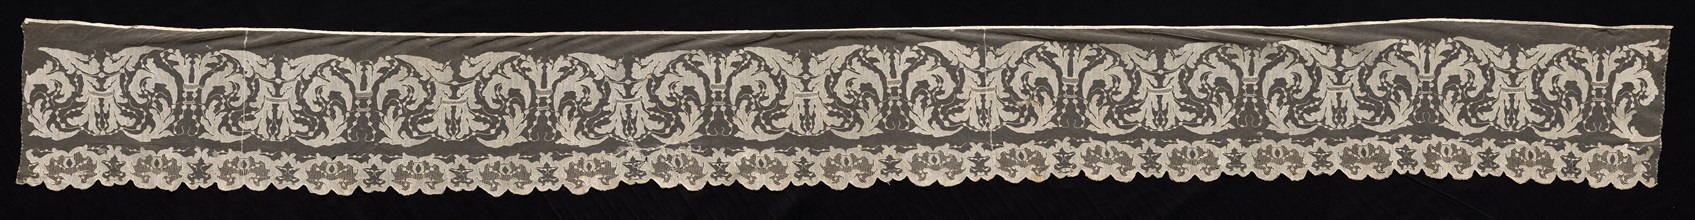 Border with Birds and Floral Motifs, 19th century. Italy, Sardinia, 19th century. Needle lace,